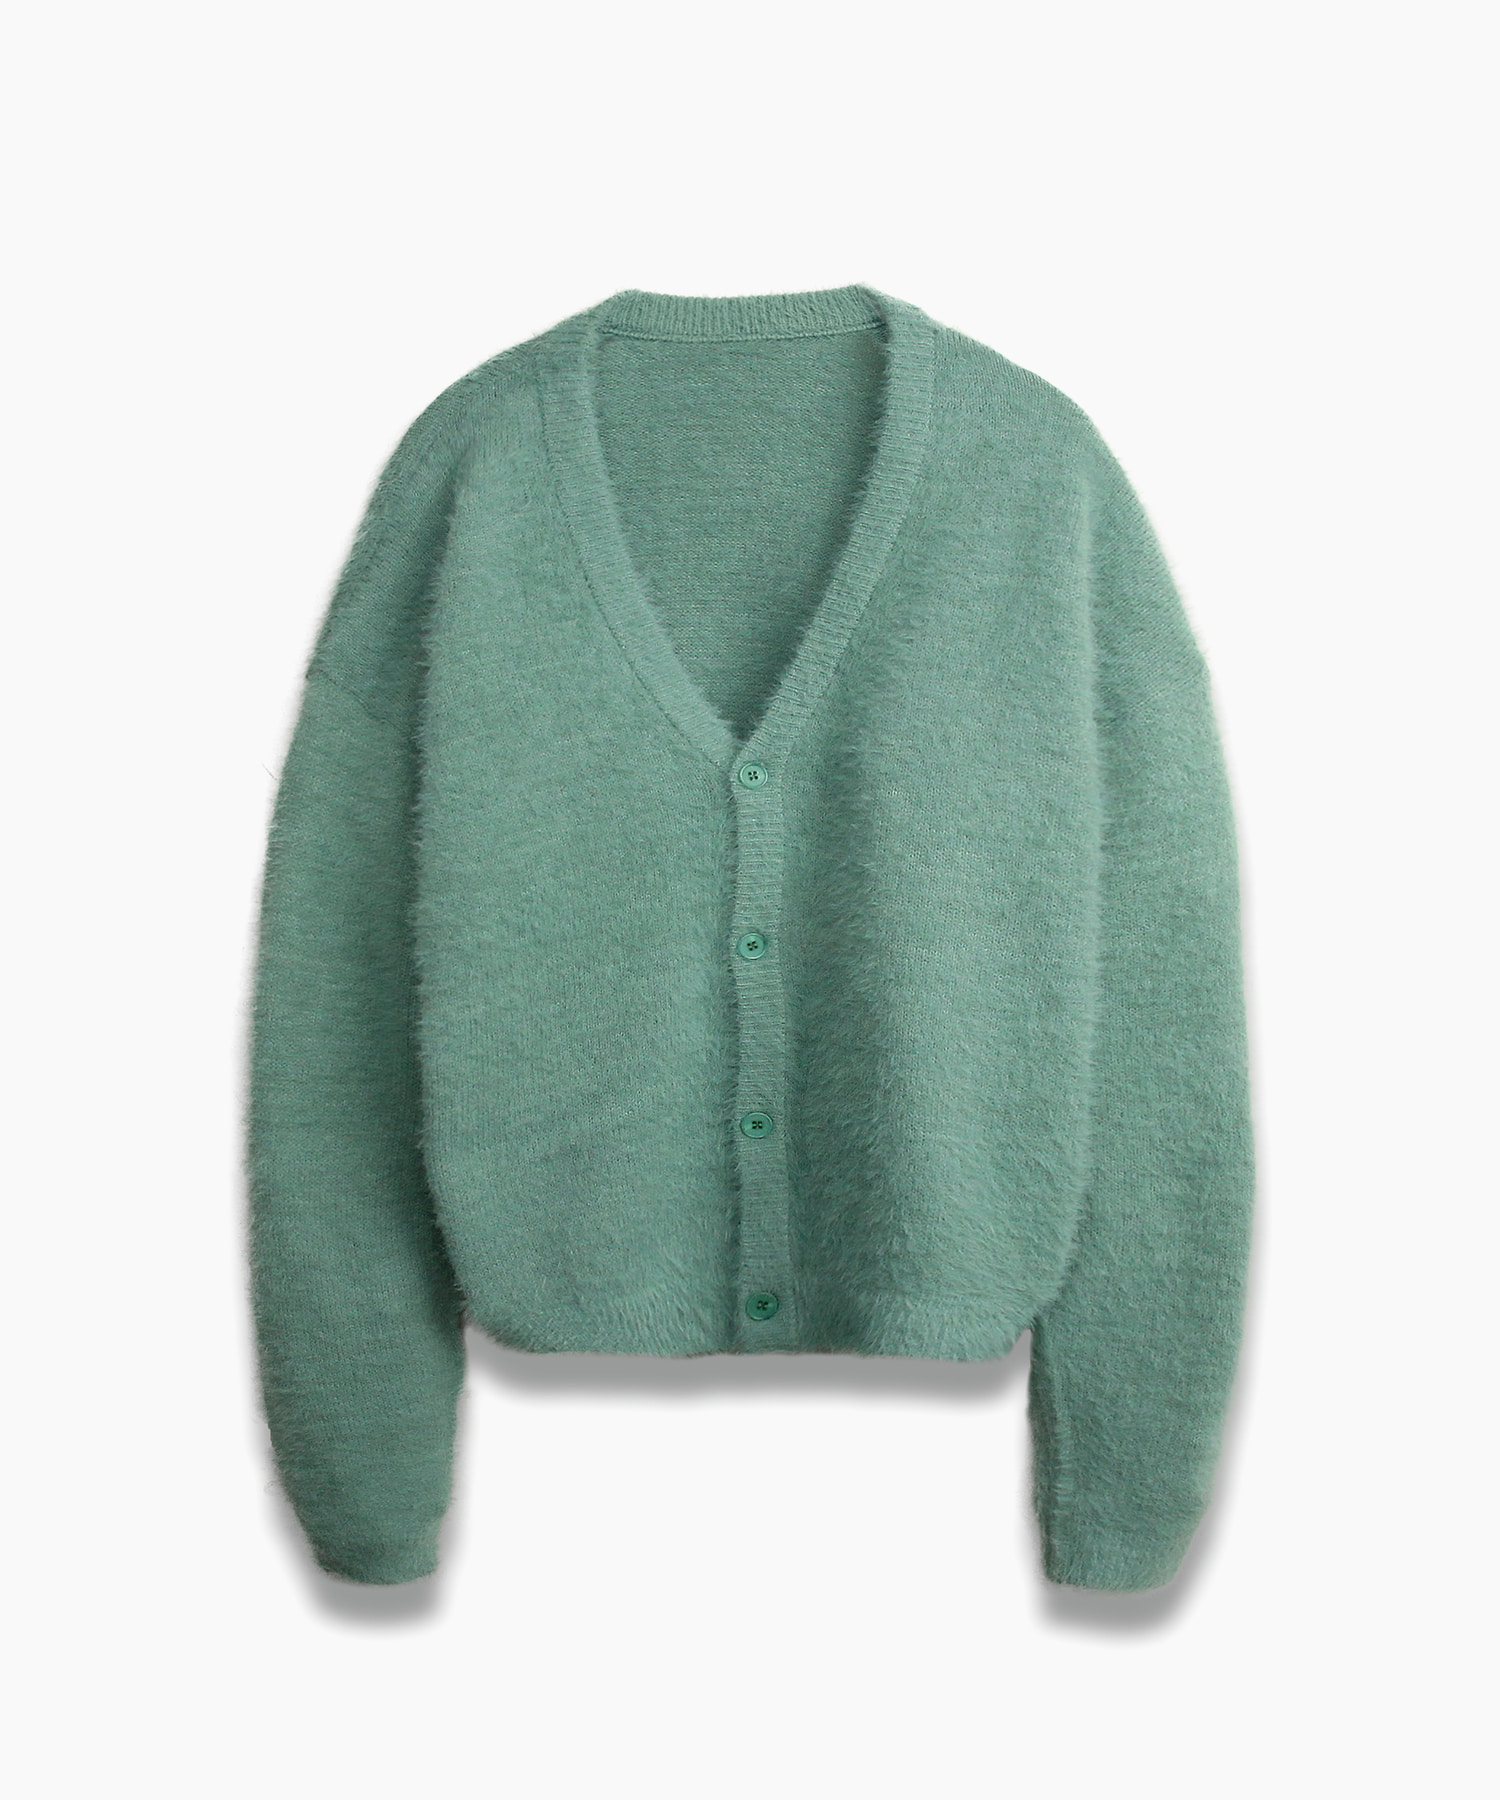 Nomad Hairy Cardigan MINT (S/S VER.)